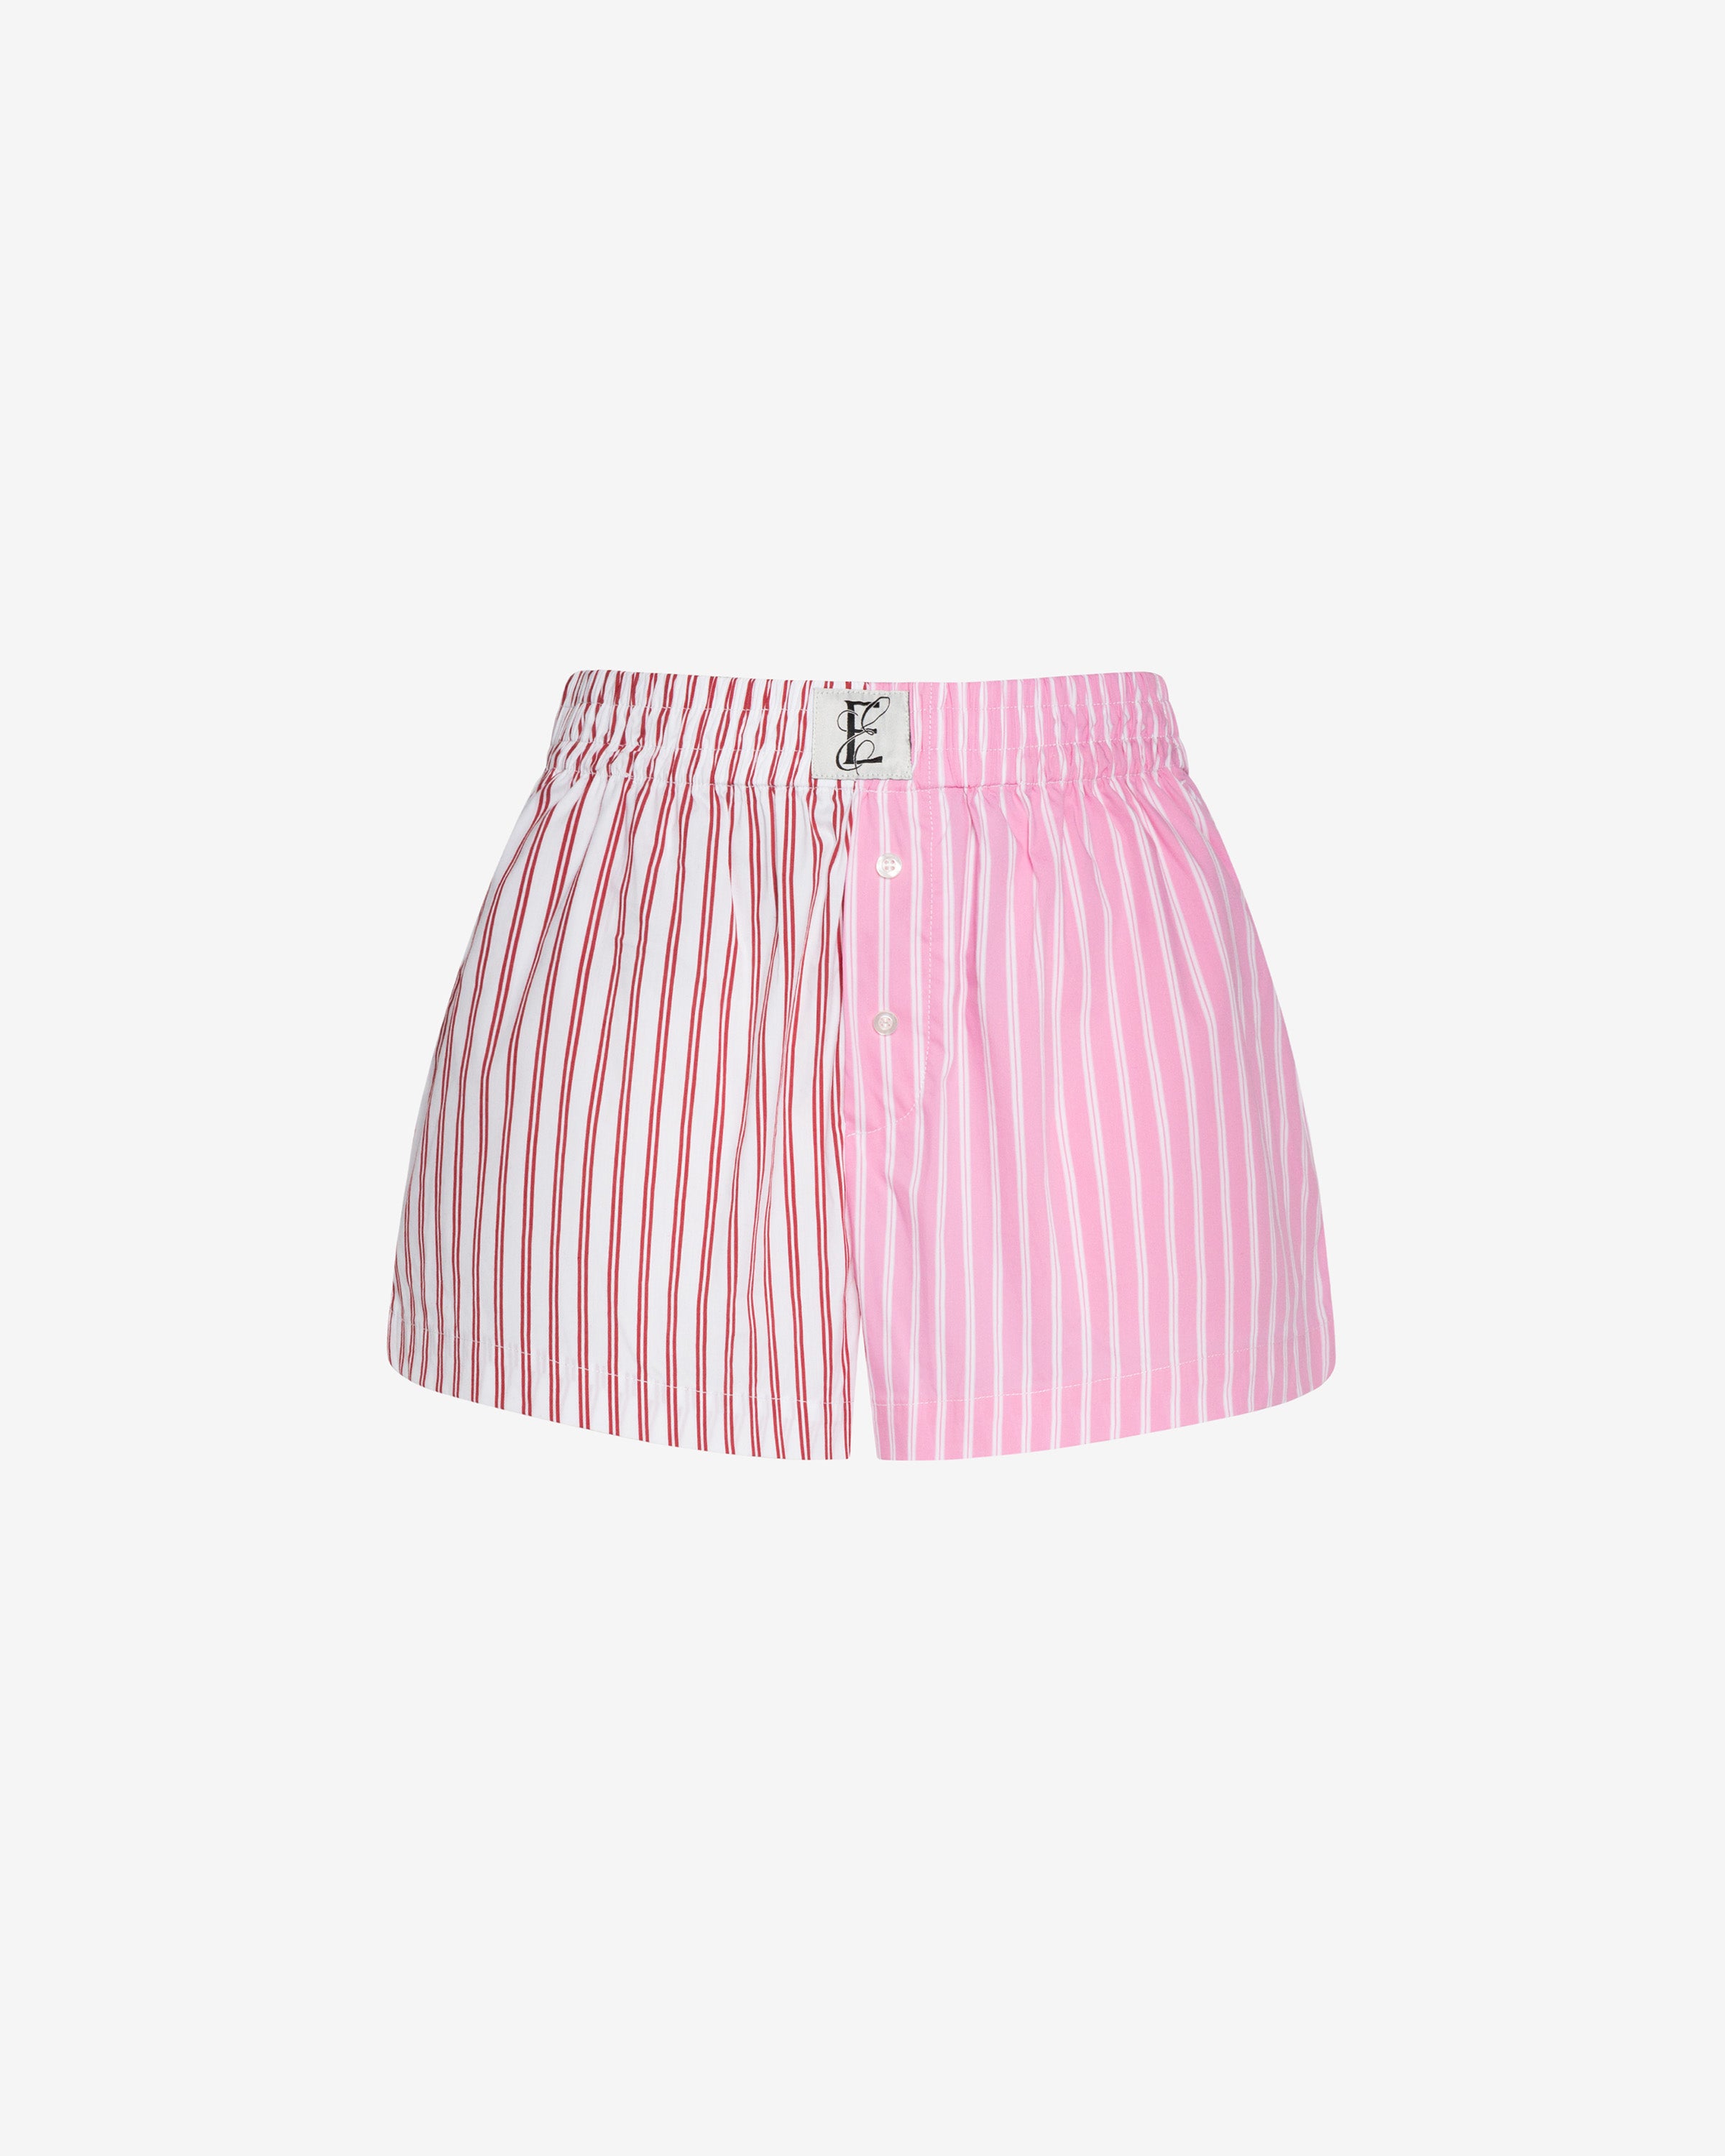 Duo Striped Boxer Short in Pink/Red